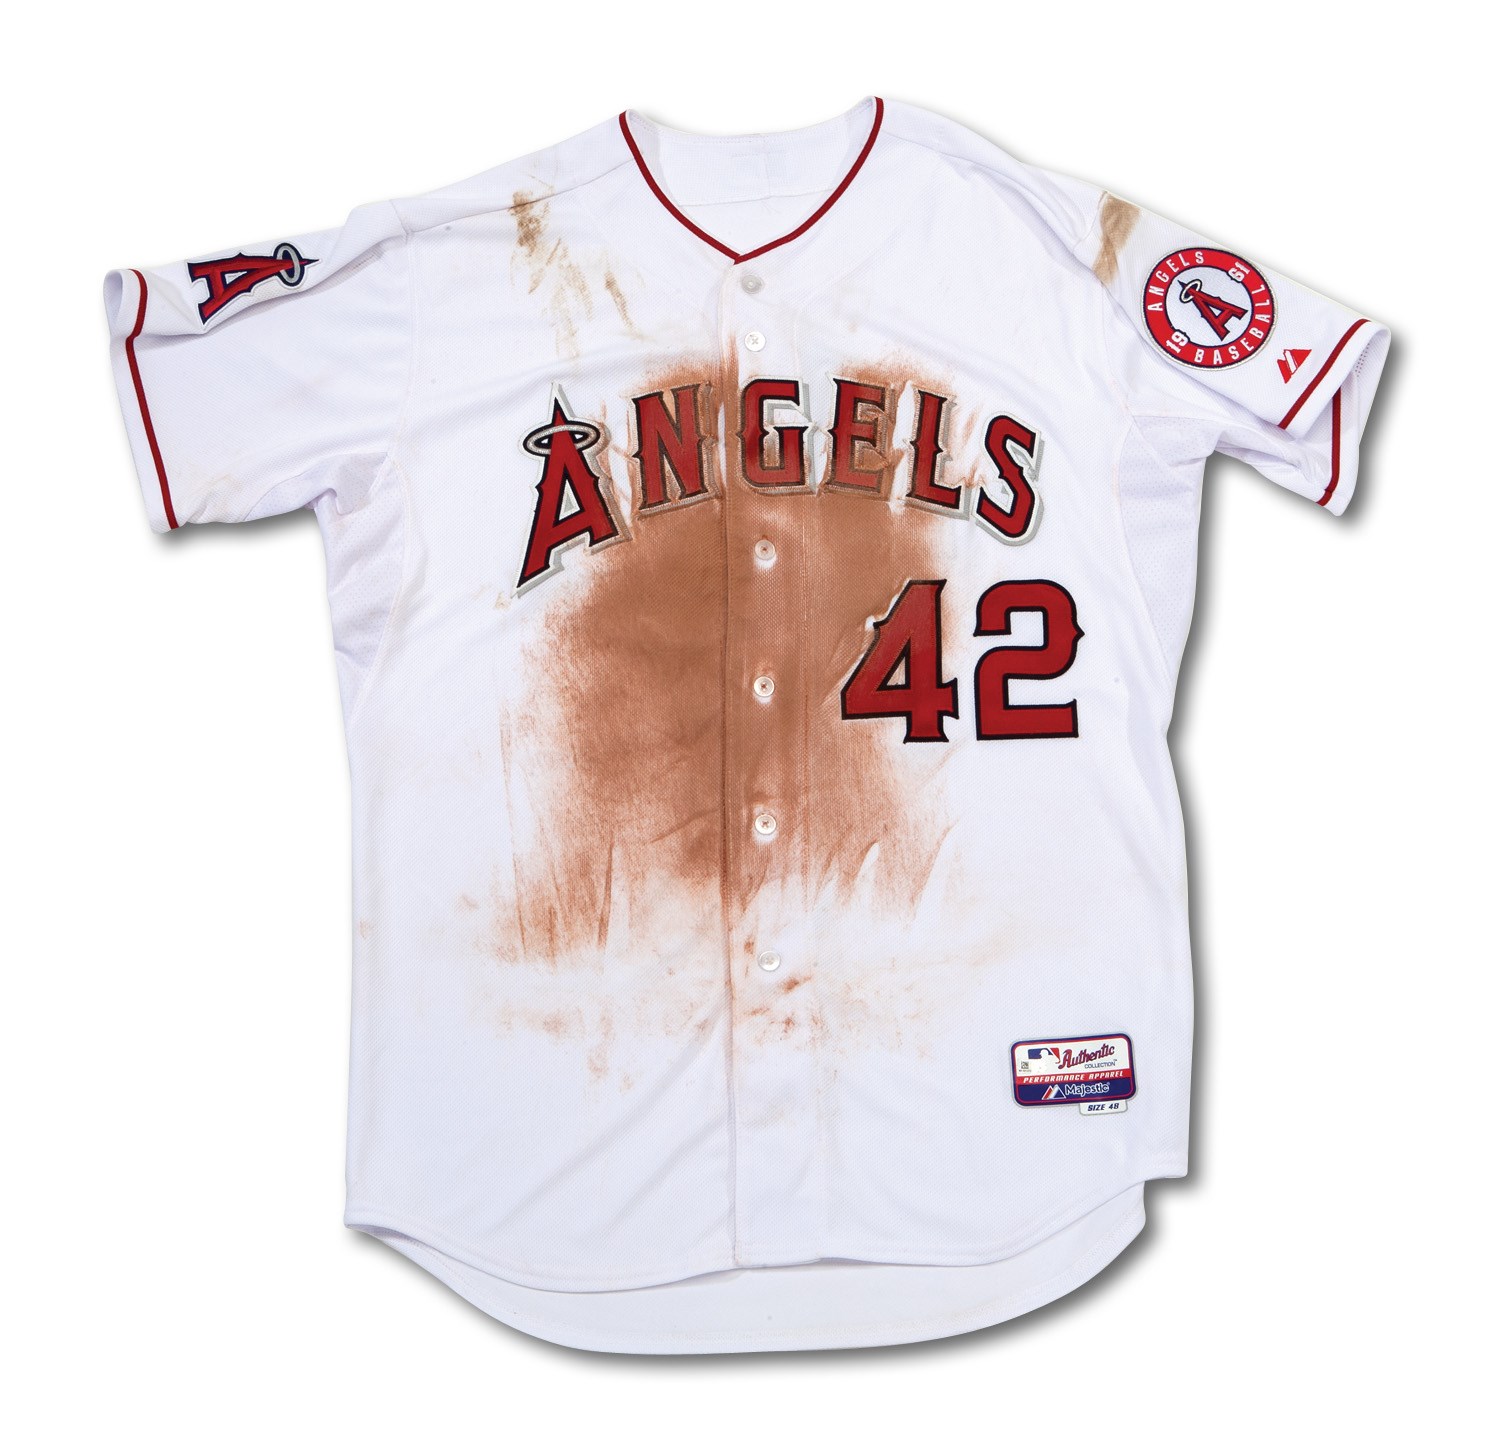 Mike Trout 2014 Jackie Robinson Day Game-Used Jersey Size 48